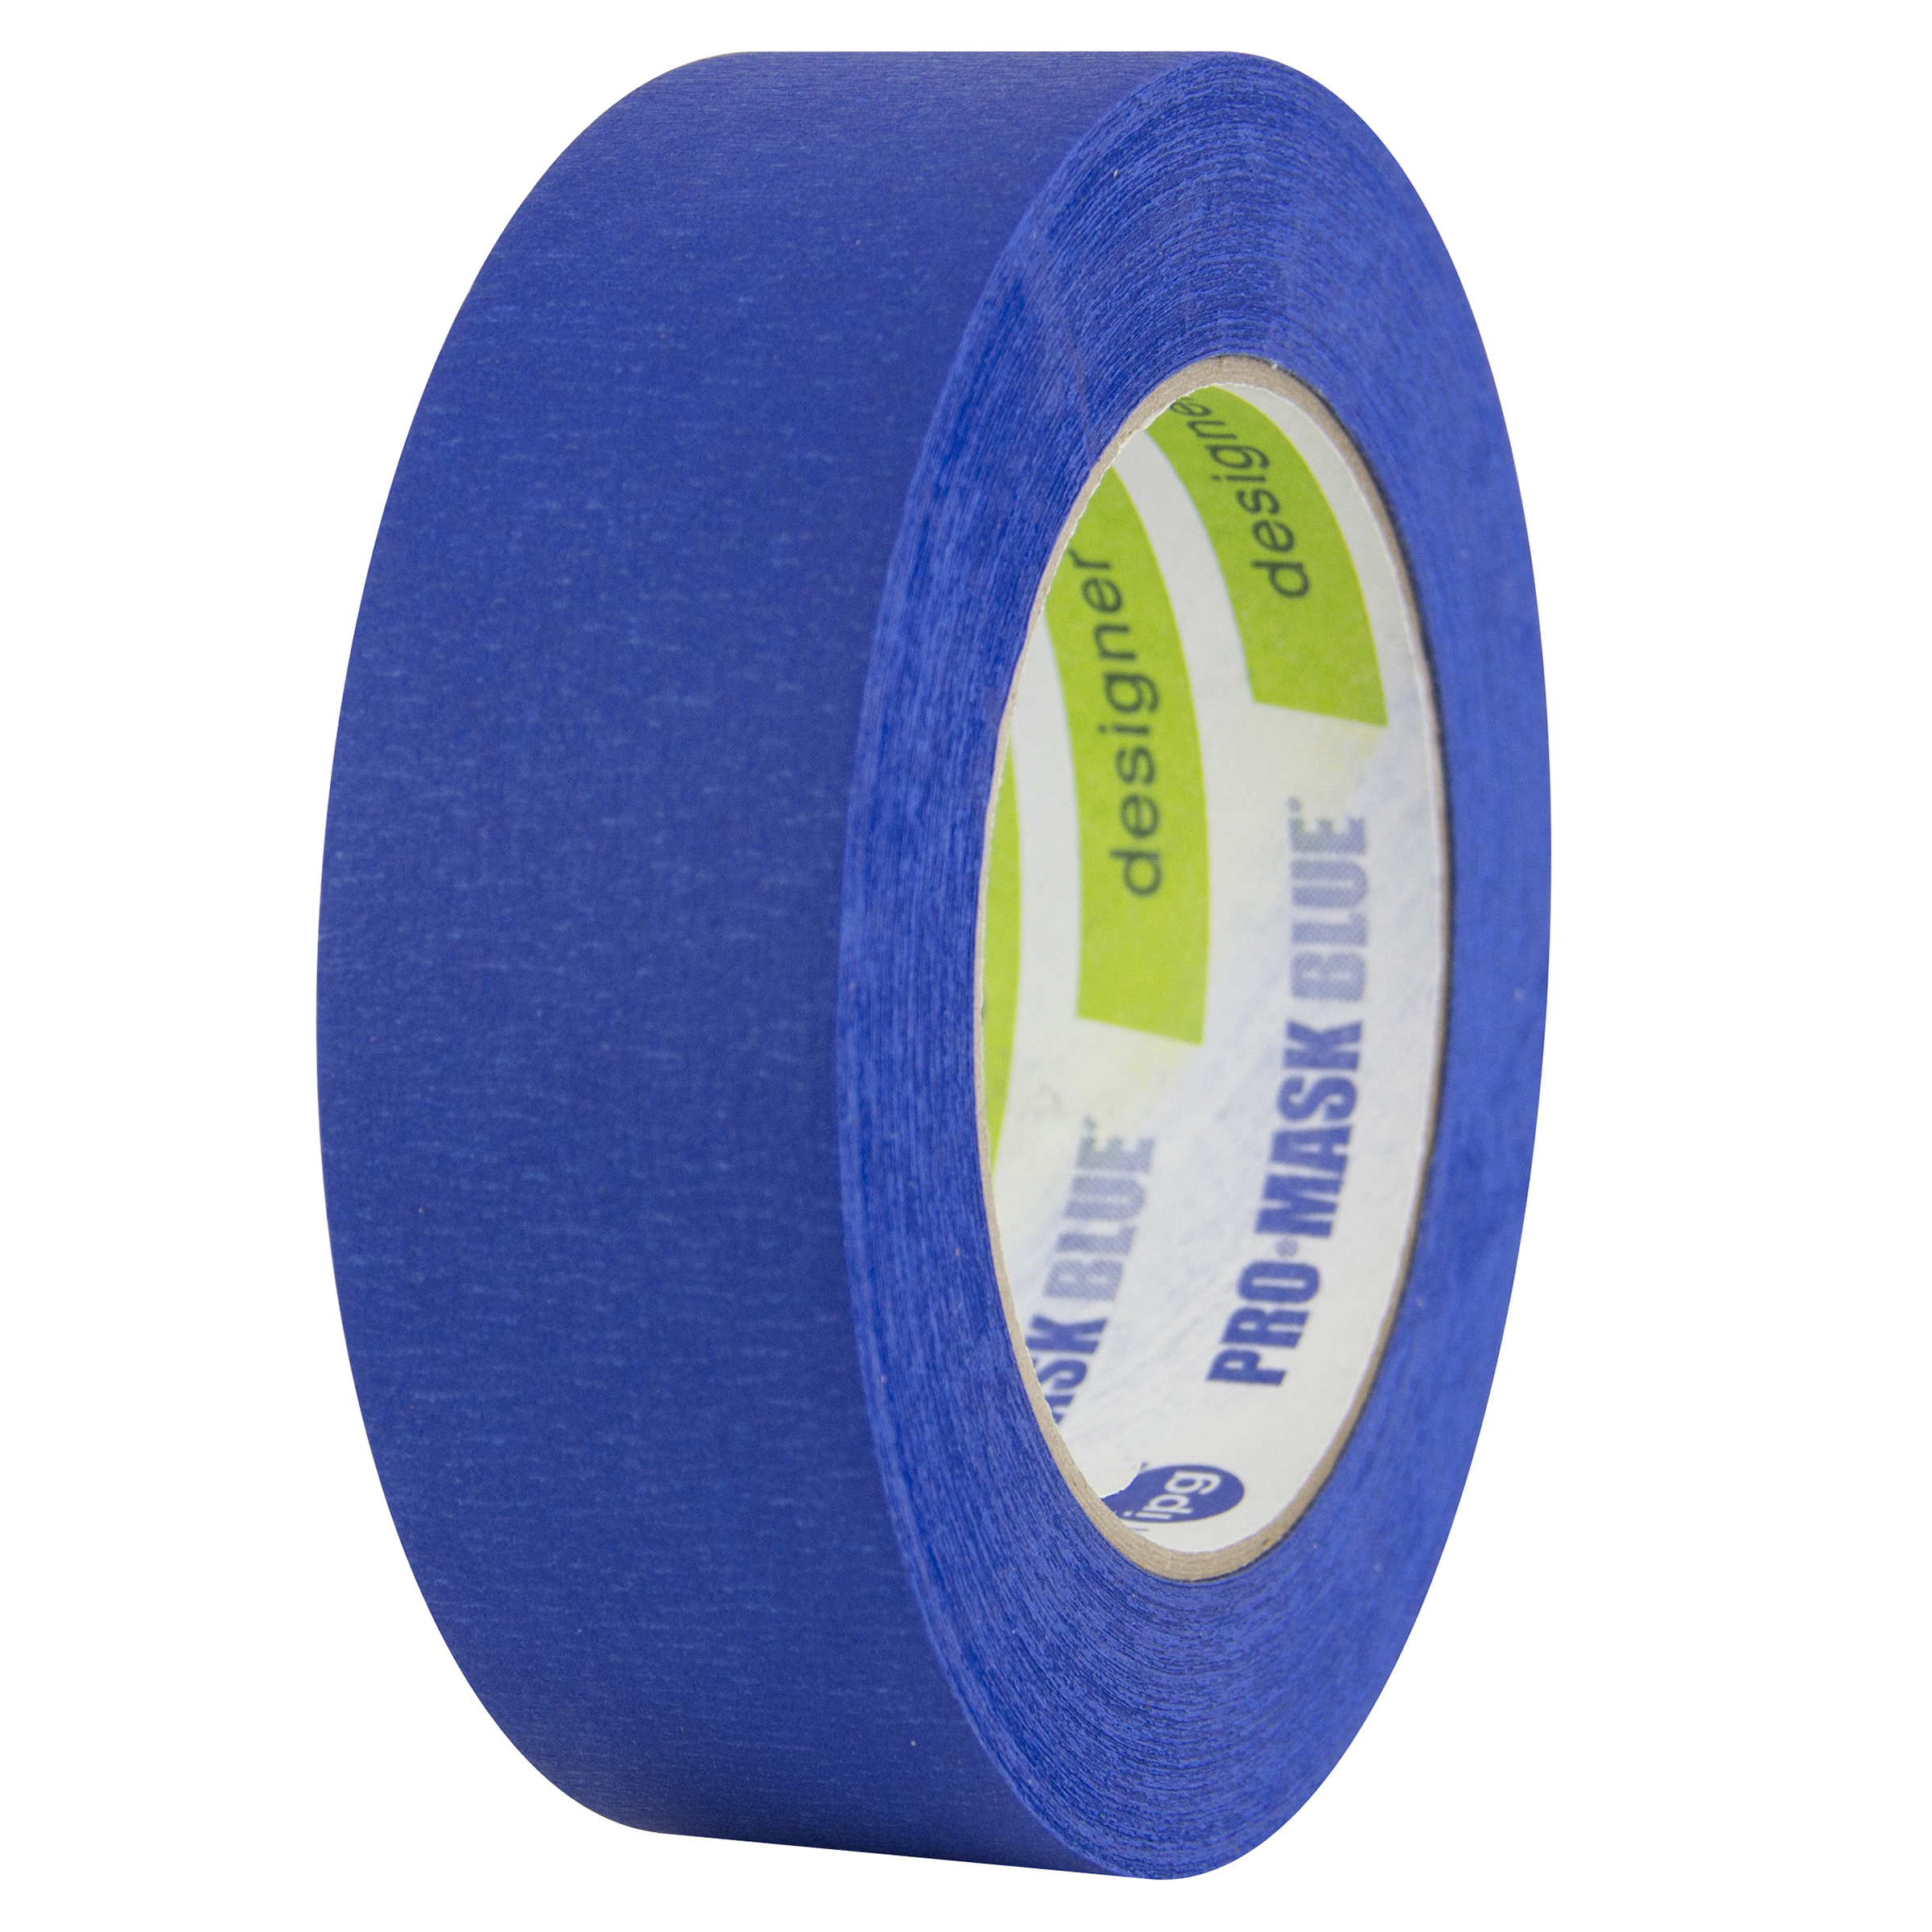 Intertape PT7 24X55 Painters Grade 7 Day Clean Removal Masking Tape PT7  Blue, 24 mm x 55 m, 36 Per